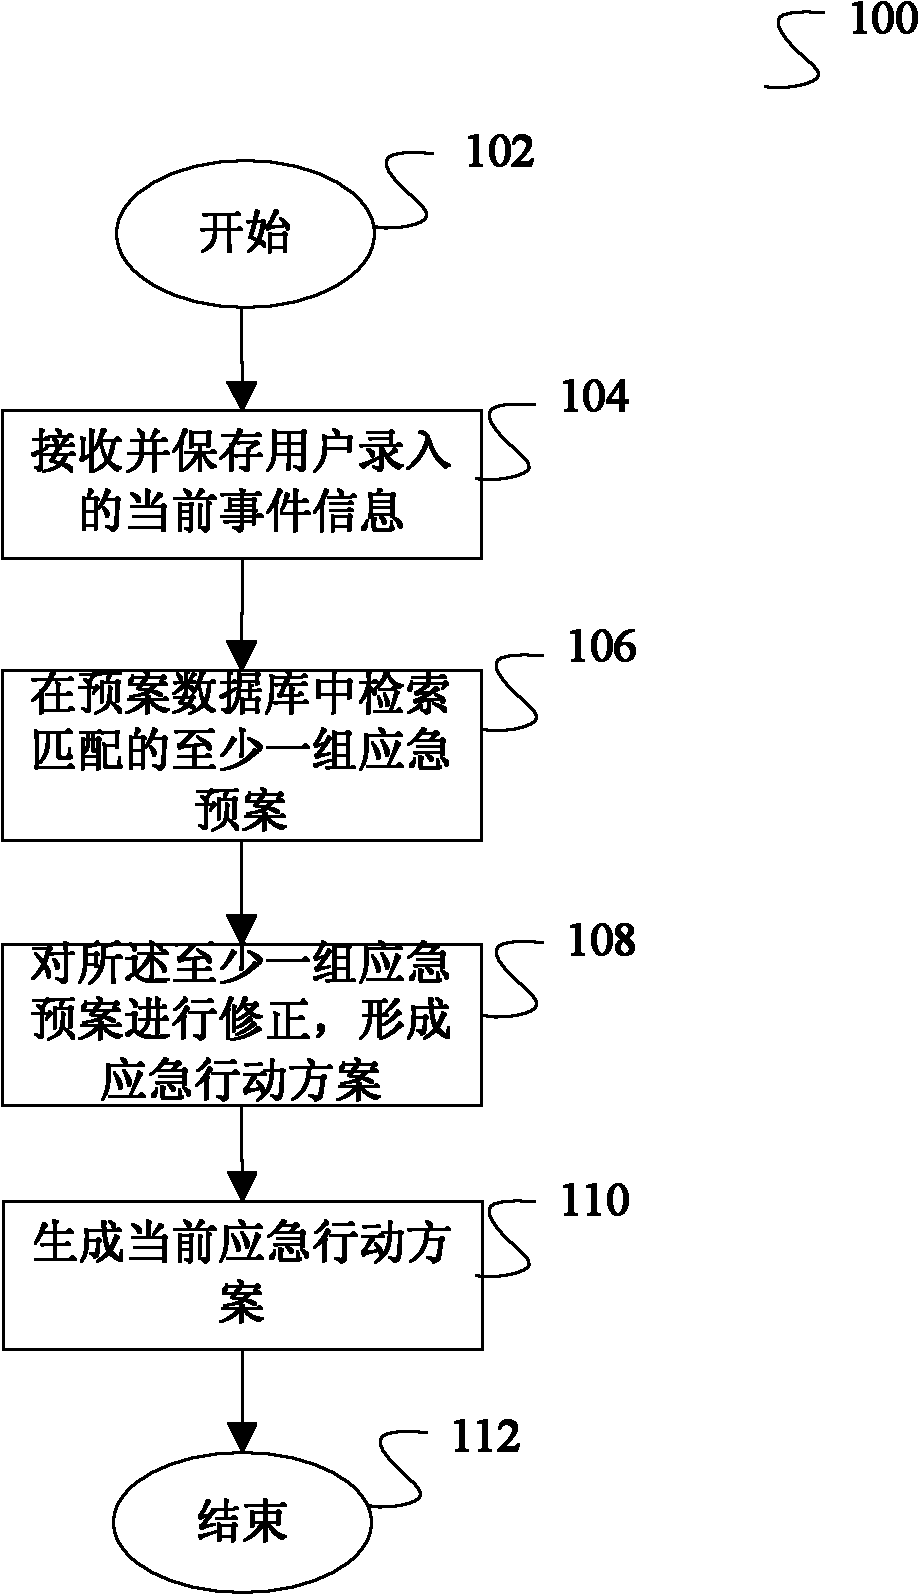 Method and system for generating emergency action plan based on pre-arranged plan